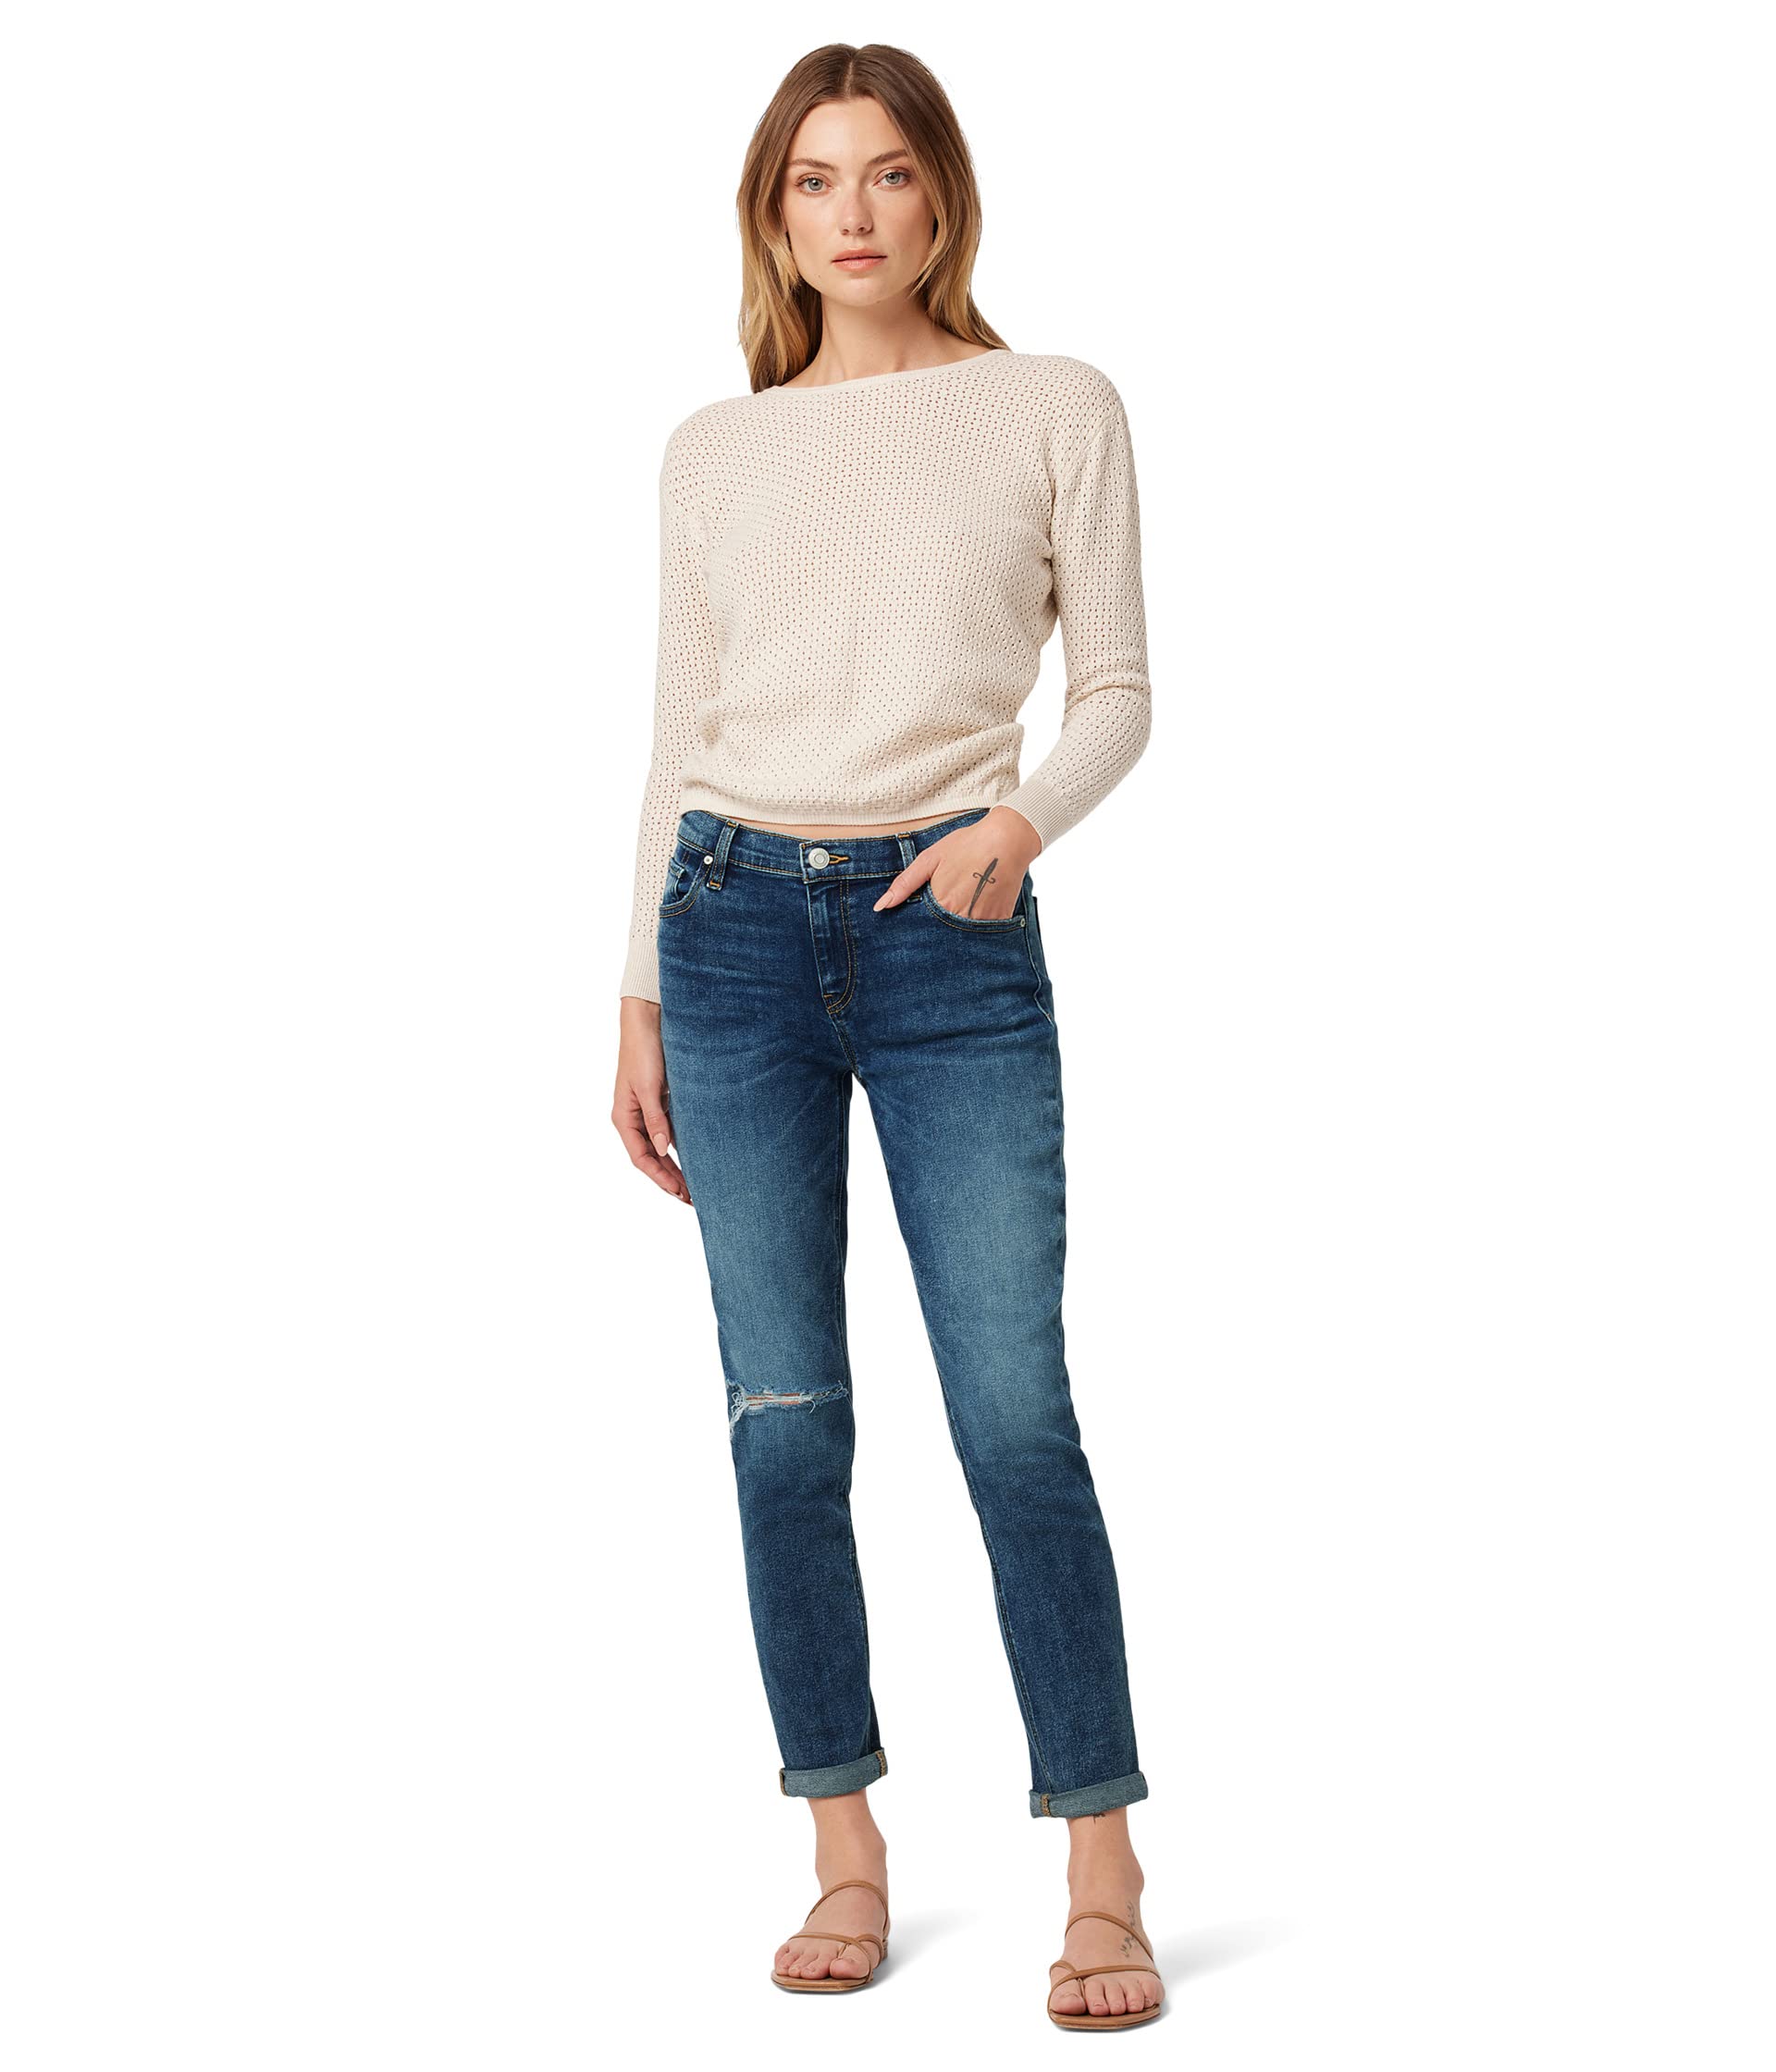 джинсы hudson jeans nico straight ankle in journey home цвет journey home Джинсы Hudson Jeans, Lana Slim Boyfriend Crop in Journey Home Destructed